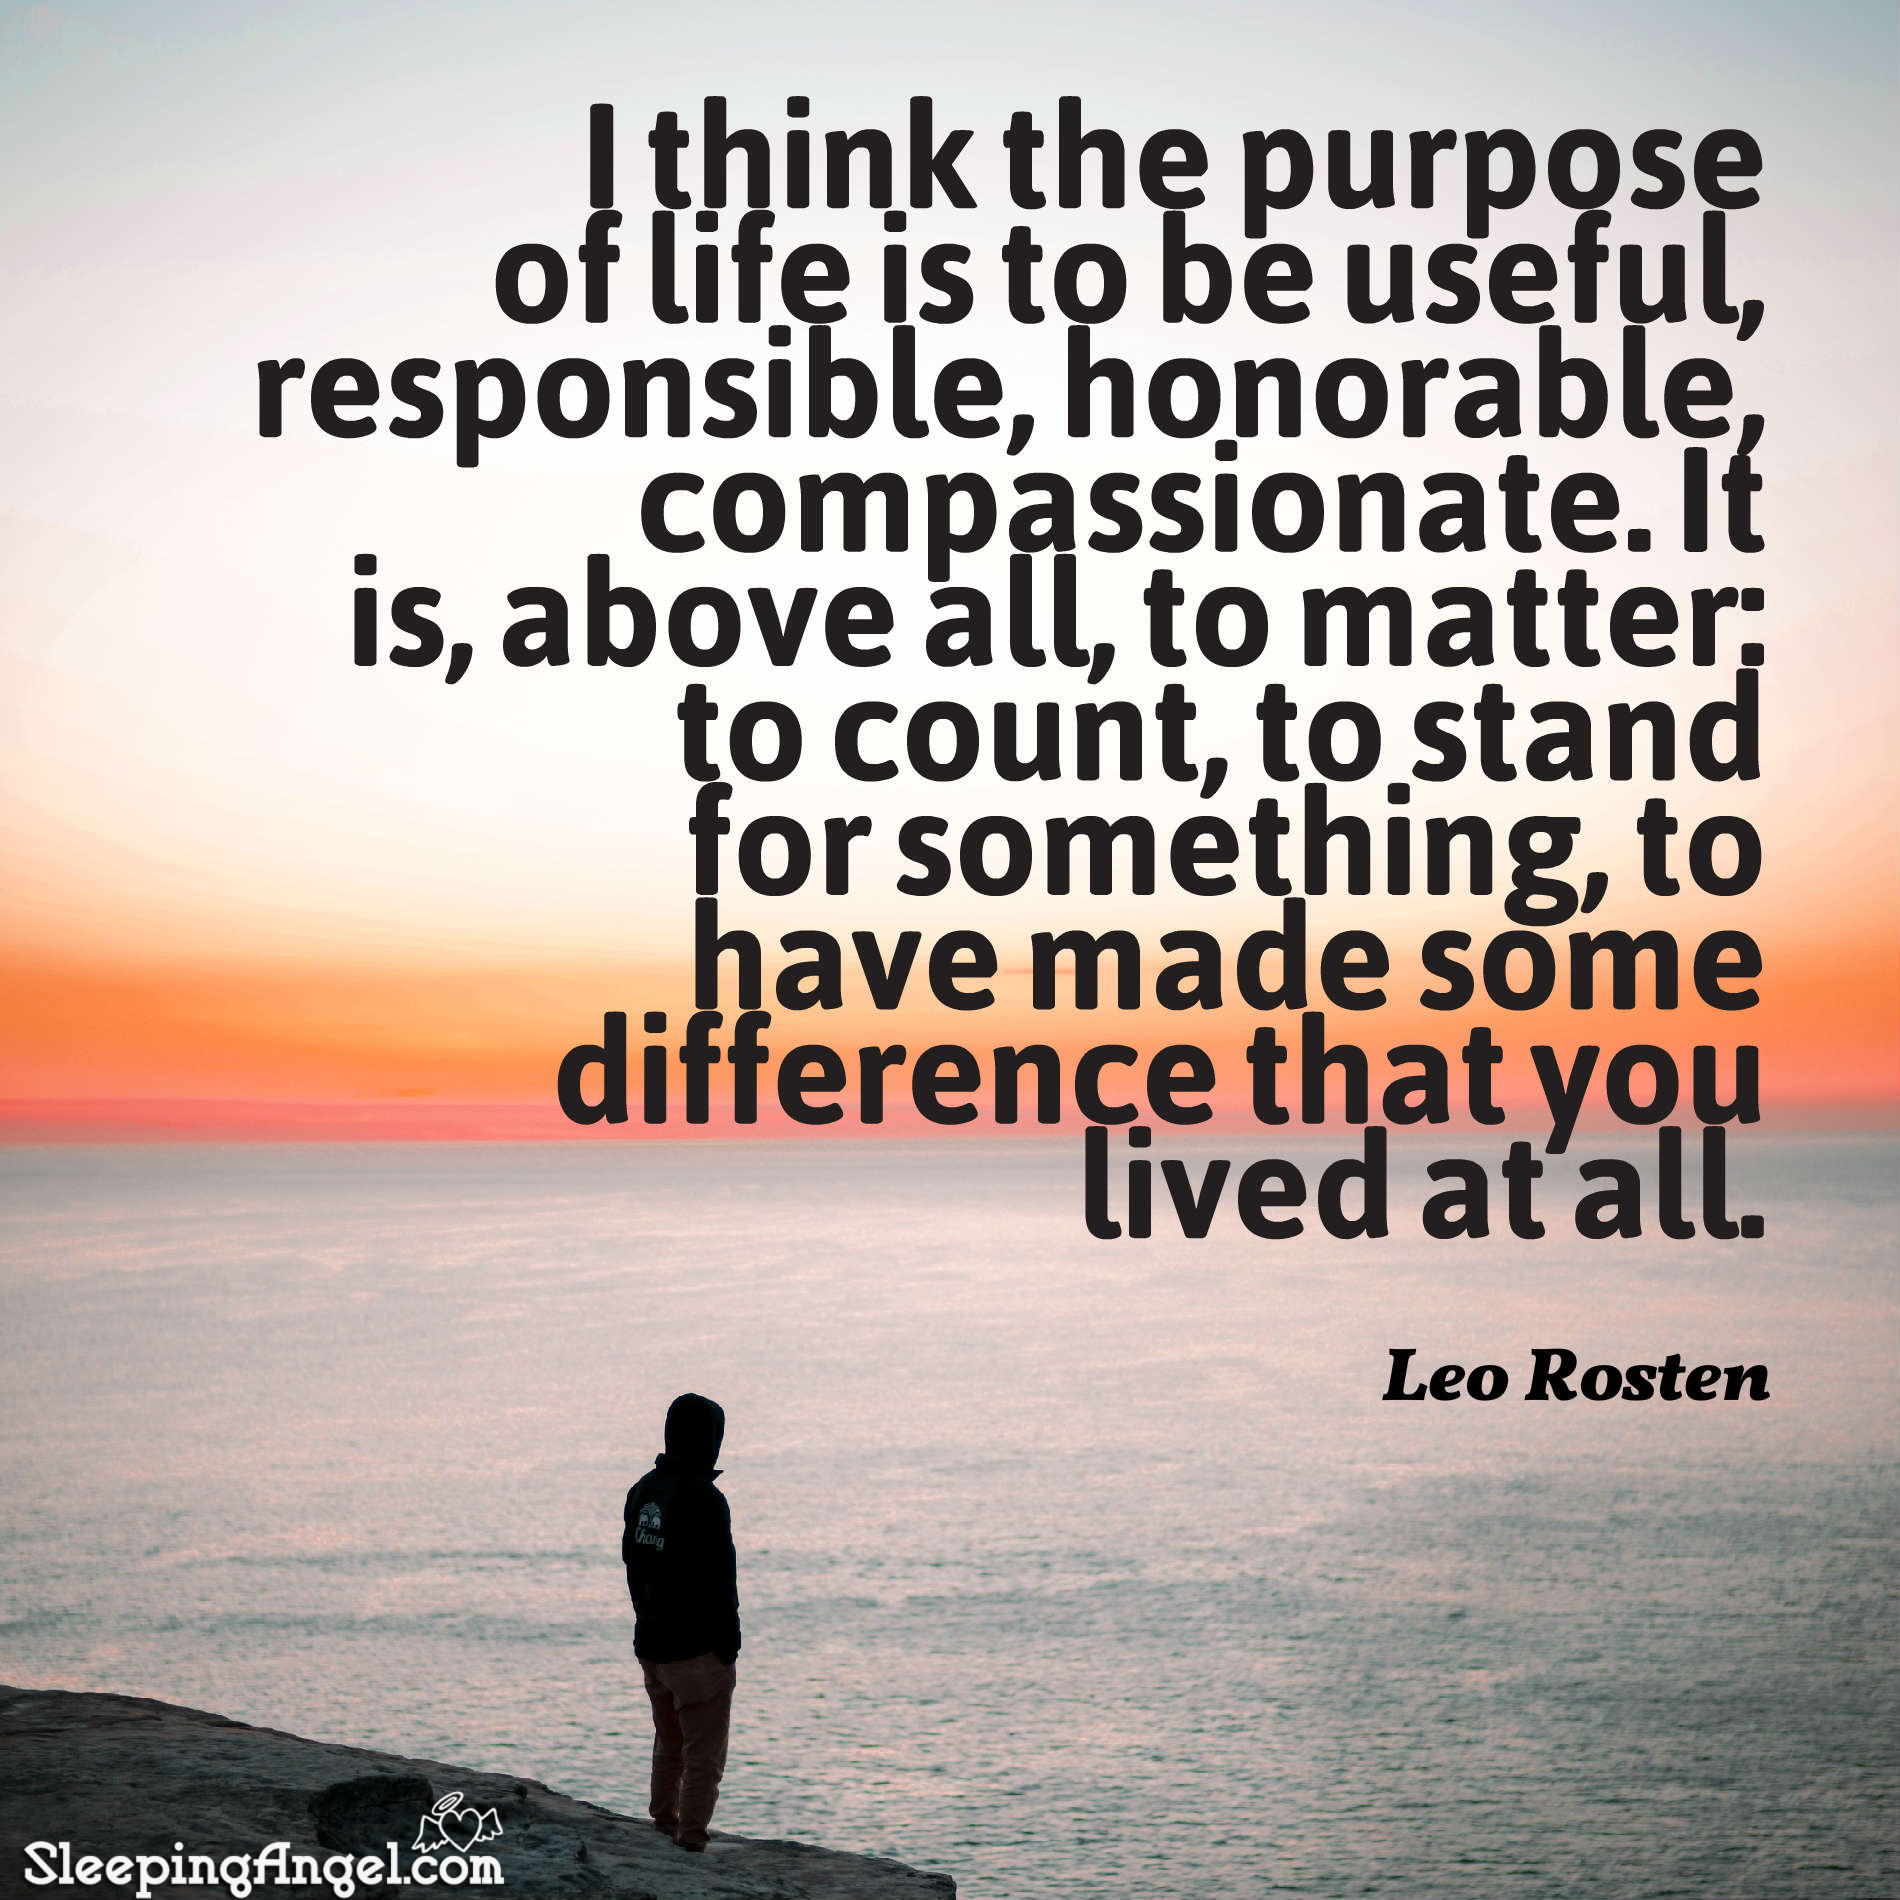 The Purpose of Life Quote